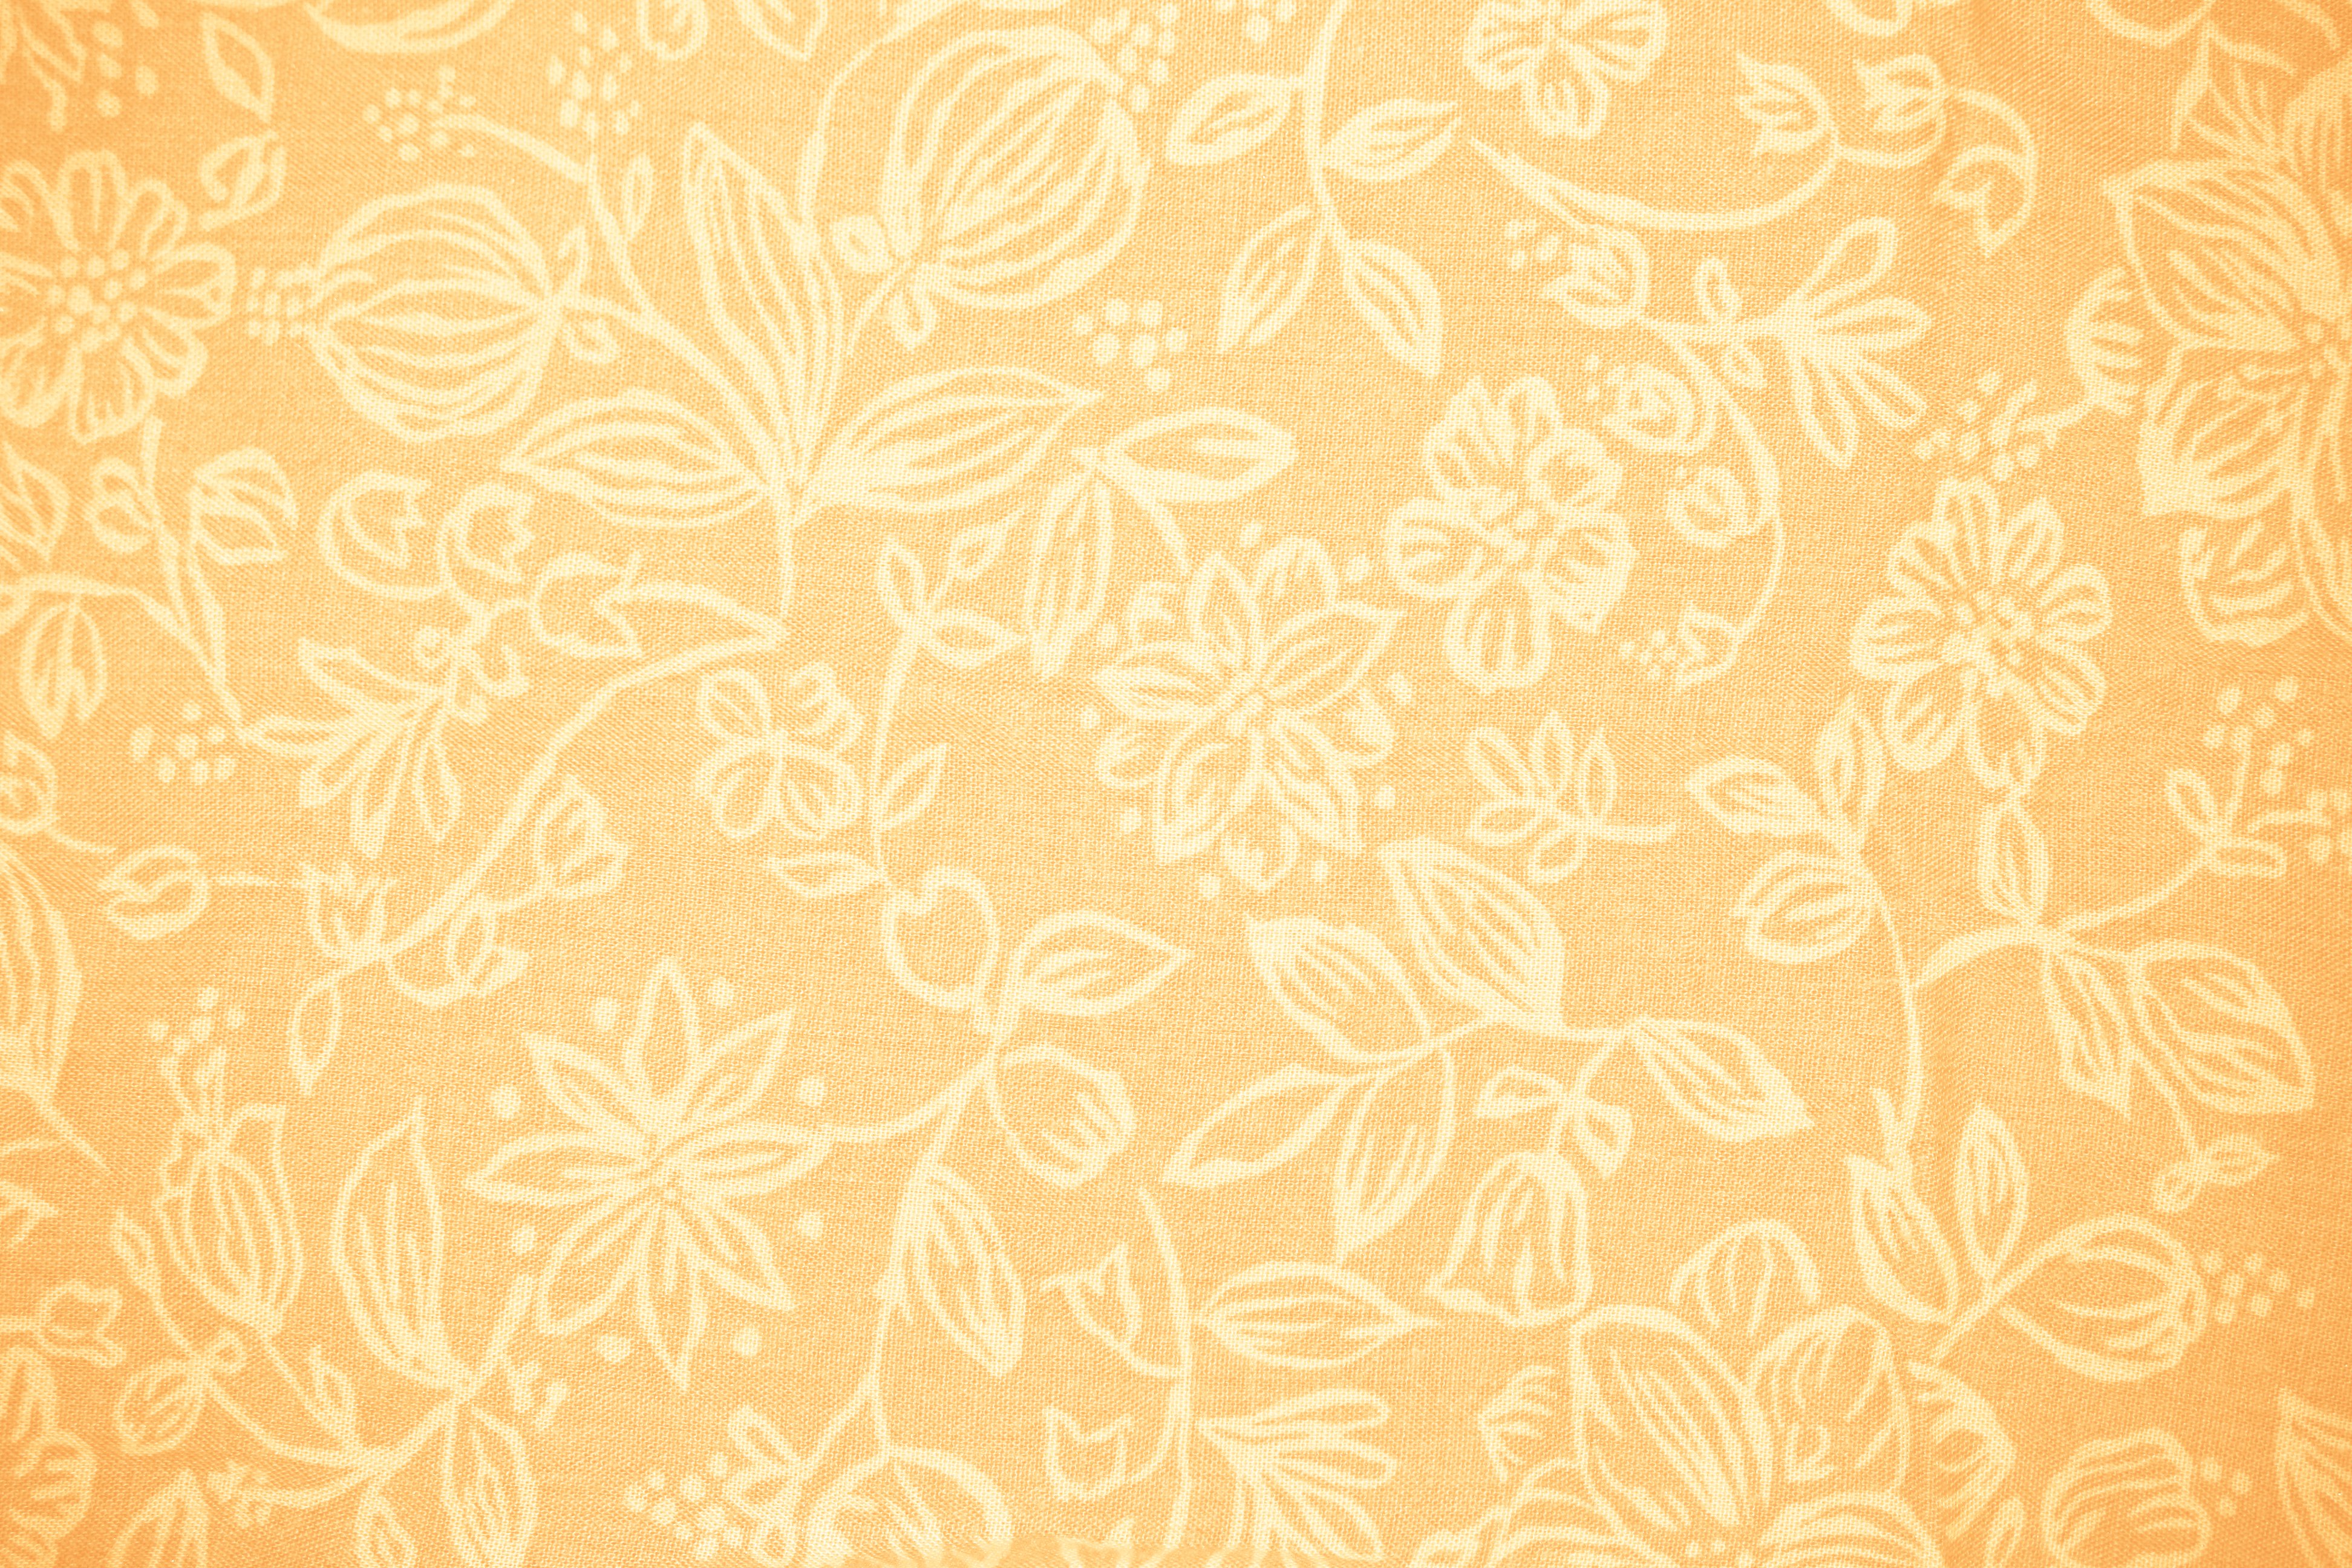 Peach Colored Fabric with Floral Pattern Texture Picture Free